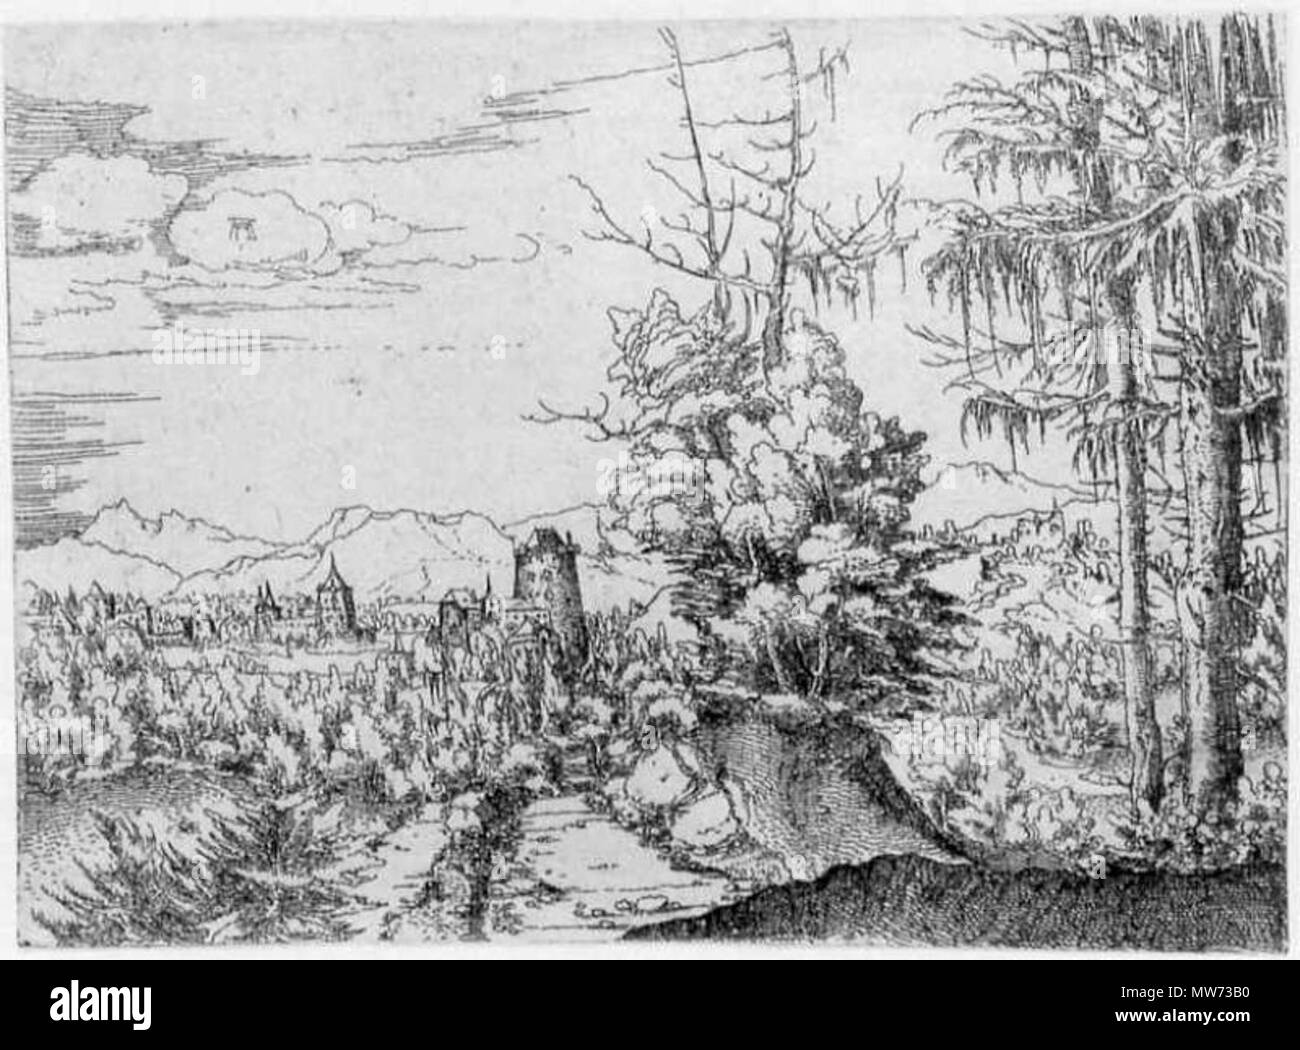 . English: Albrecht Altdorfer - Landscape with Two Spruces . 1522.   Albrecht Altdorfer  (1480–1538)     Description German painter, draughtsman, engraver and architect  Date of birth/death circa 1480 12 February 1538  Location of birth/death Altdorf or Regensburg Regensburg  Work location Regensburg  Authority control  : Q153746 VIAF: 100221829 ISNI: 0000 0001 2145 2119 ULAN: 500031250 LCCN: n50053721 NLA: 35003981 WorldCat 33 Albrecht Altdorfer - Landscape with Two Spruces Stock Photo